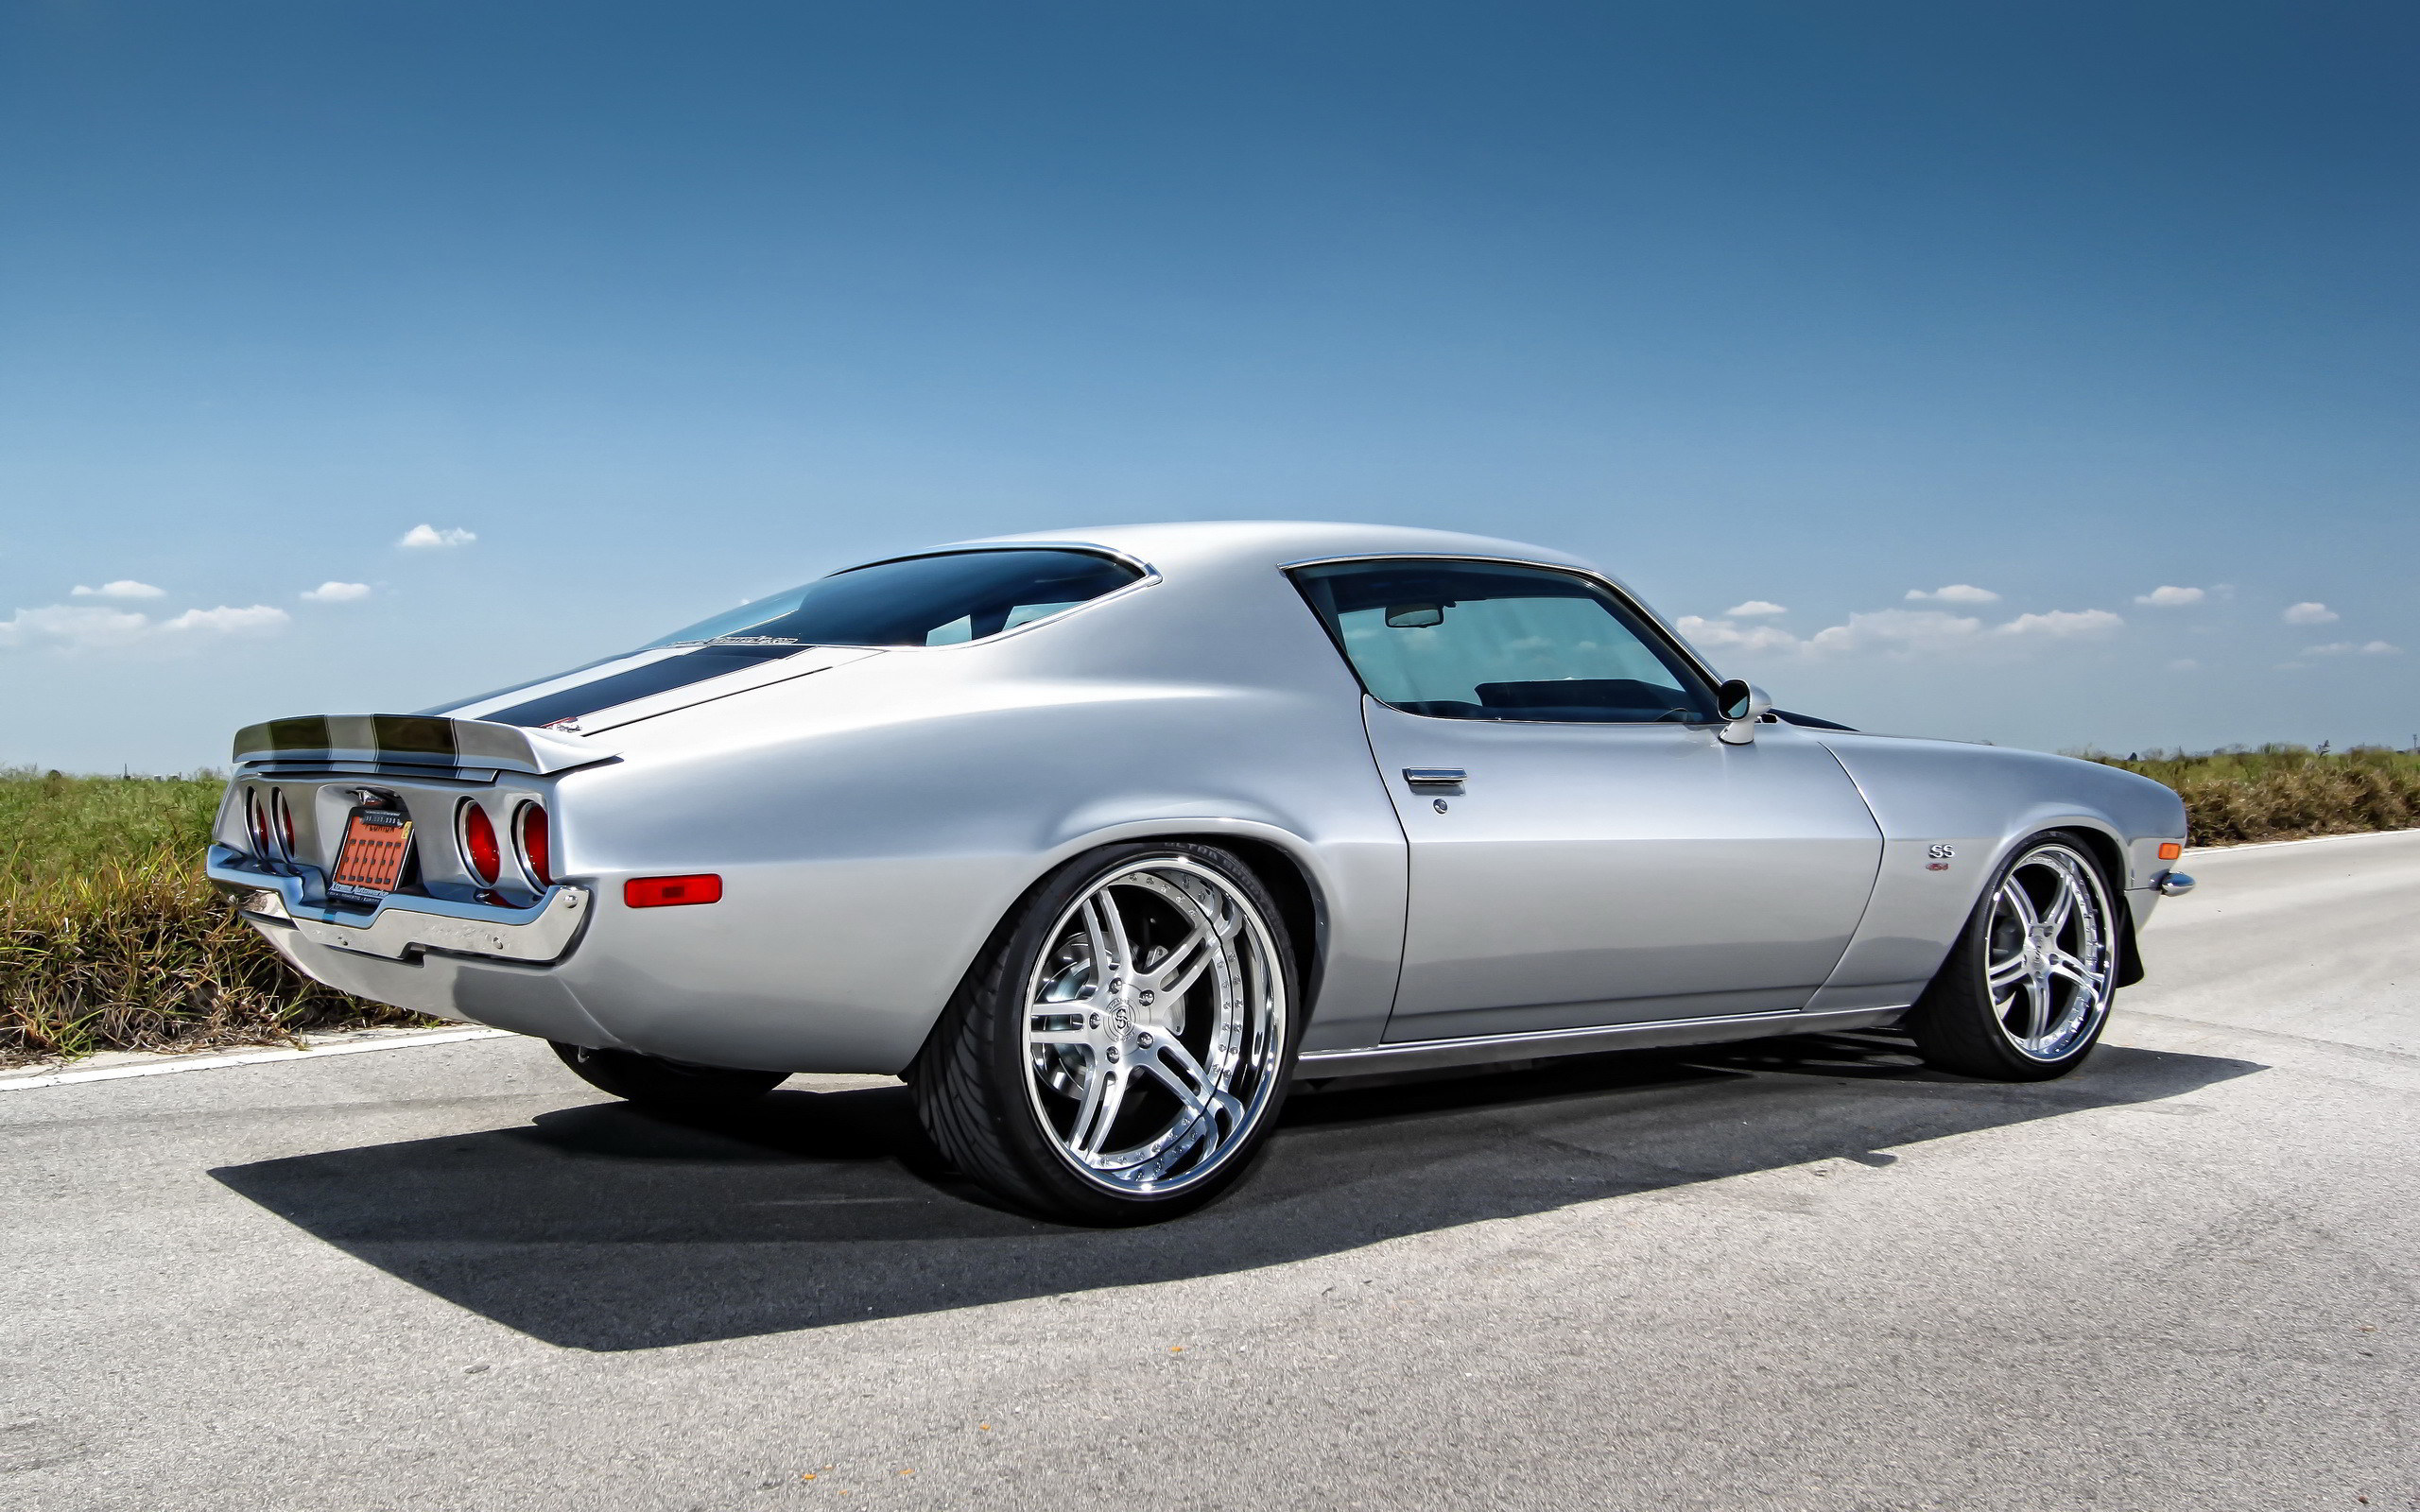 2560x1600 Chevy Muscle Car Wallpaper | Chevy camaro muscle car Wallpapers Pictures  Photos Images